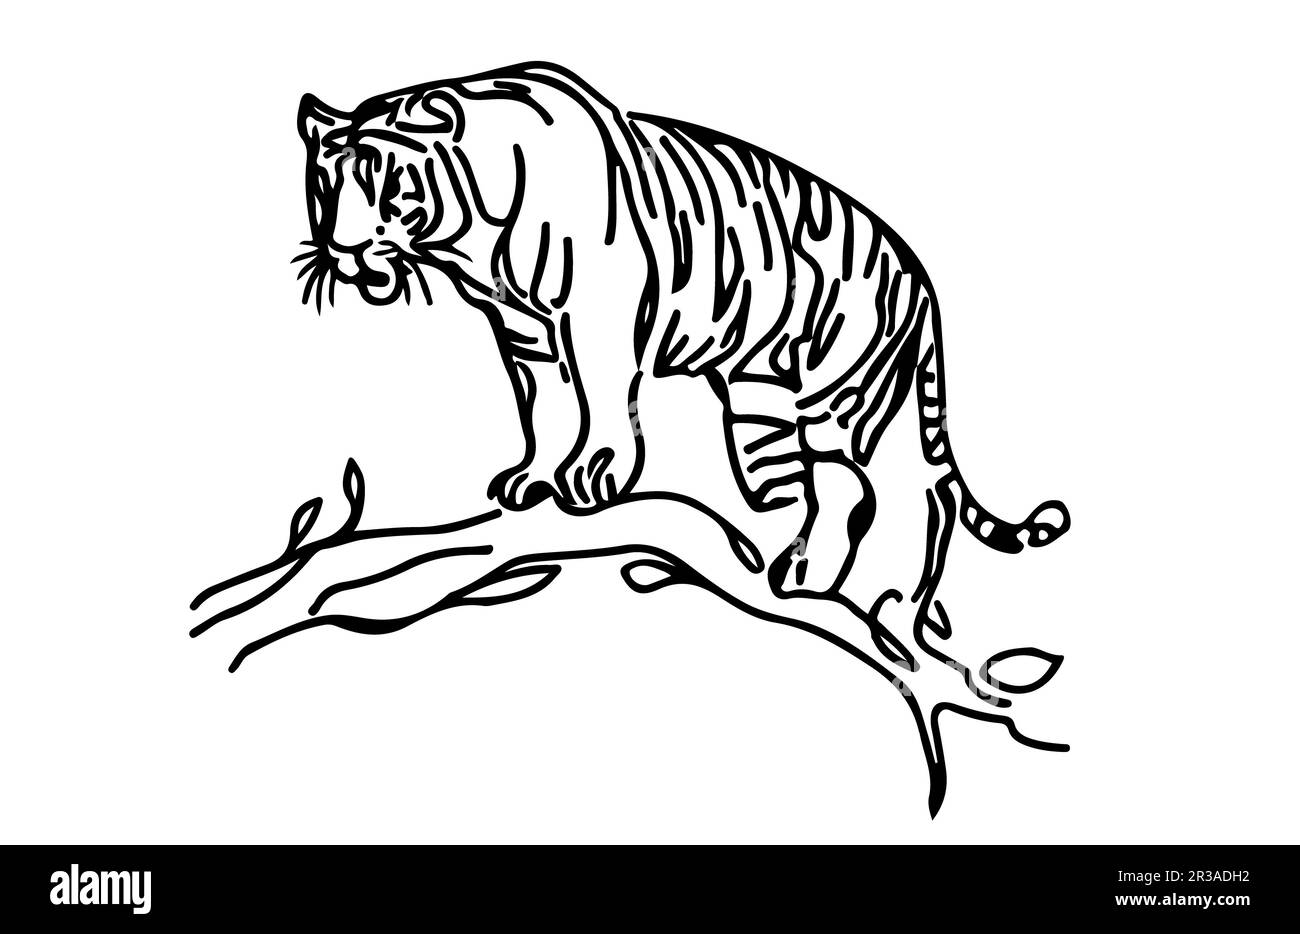 Free tiger drawing to download and color  Tigers Kids Coloring Pages